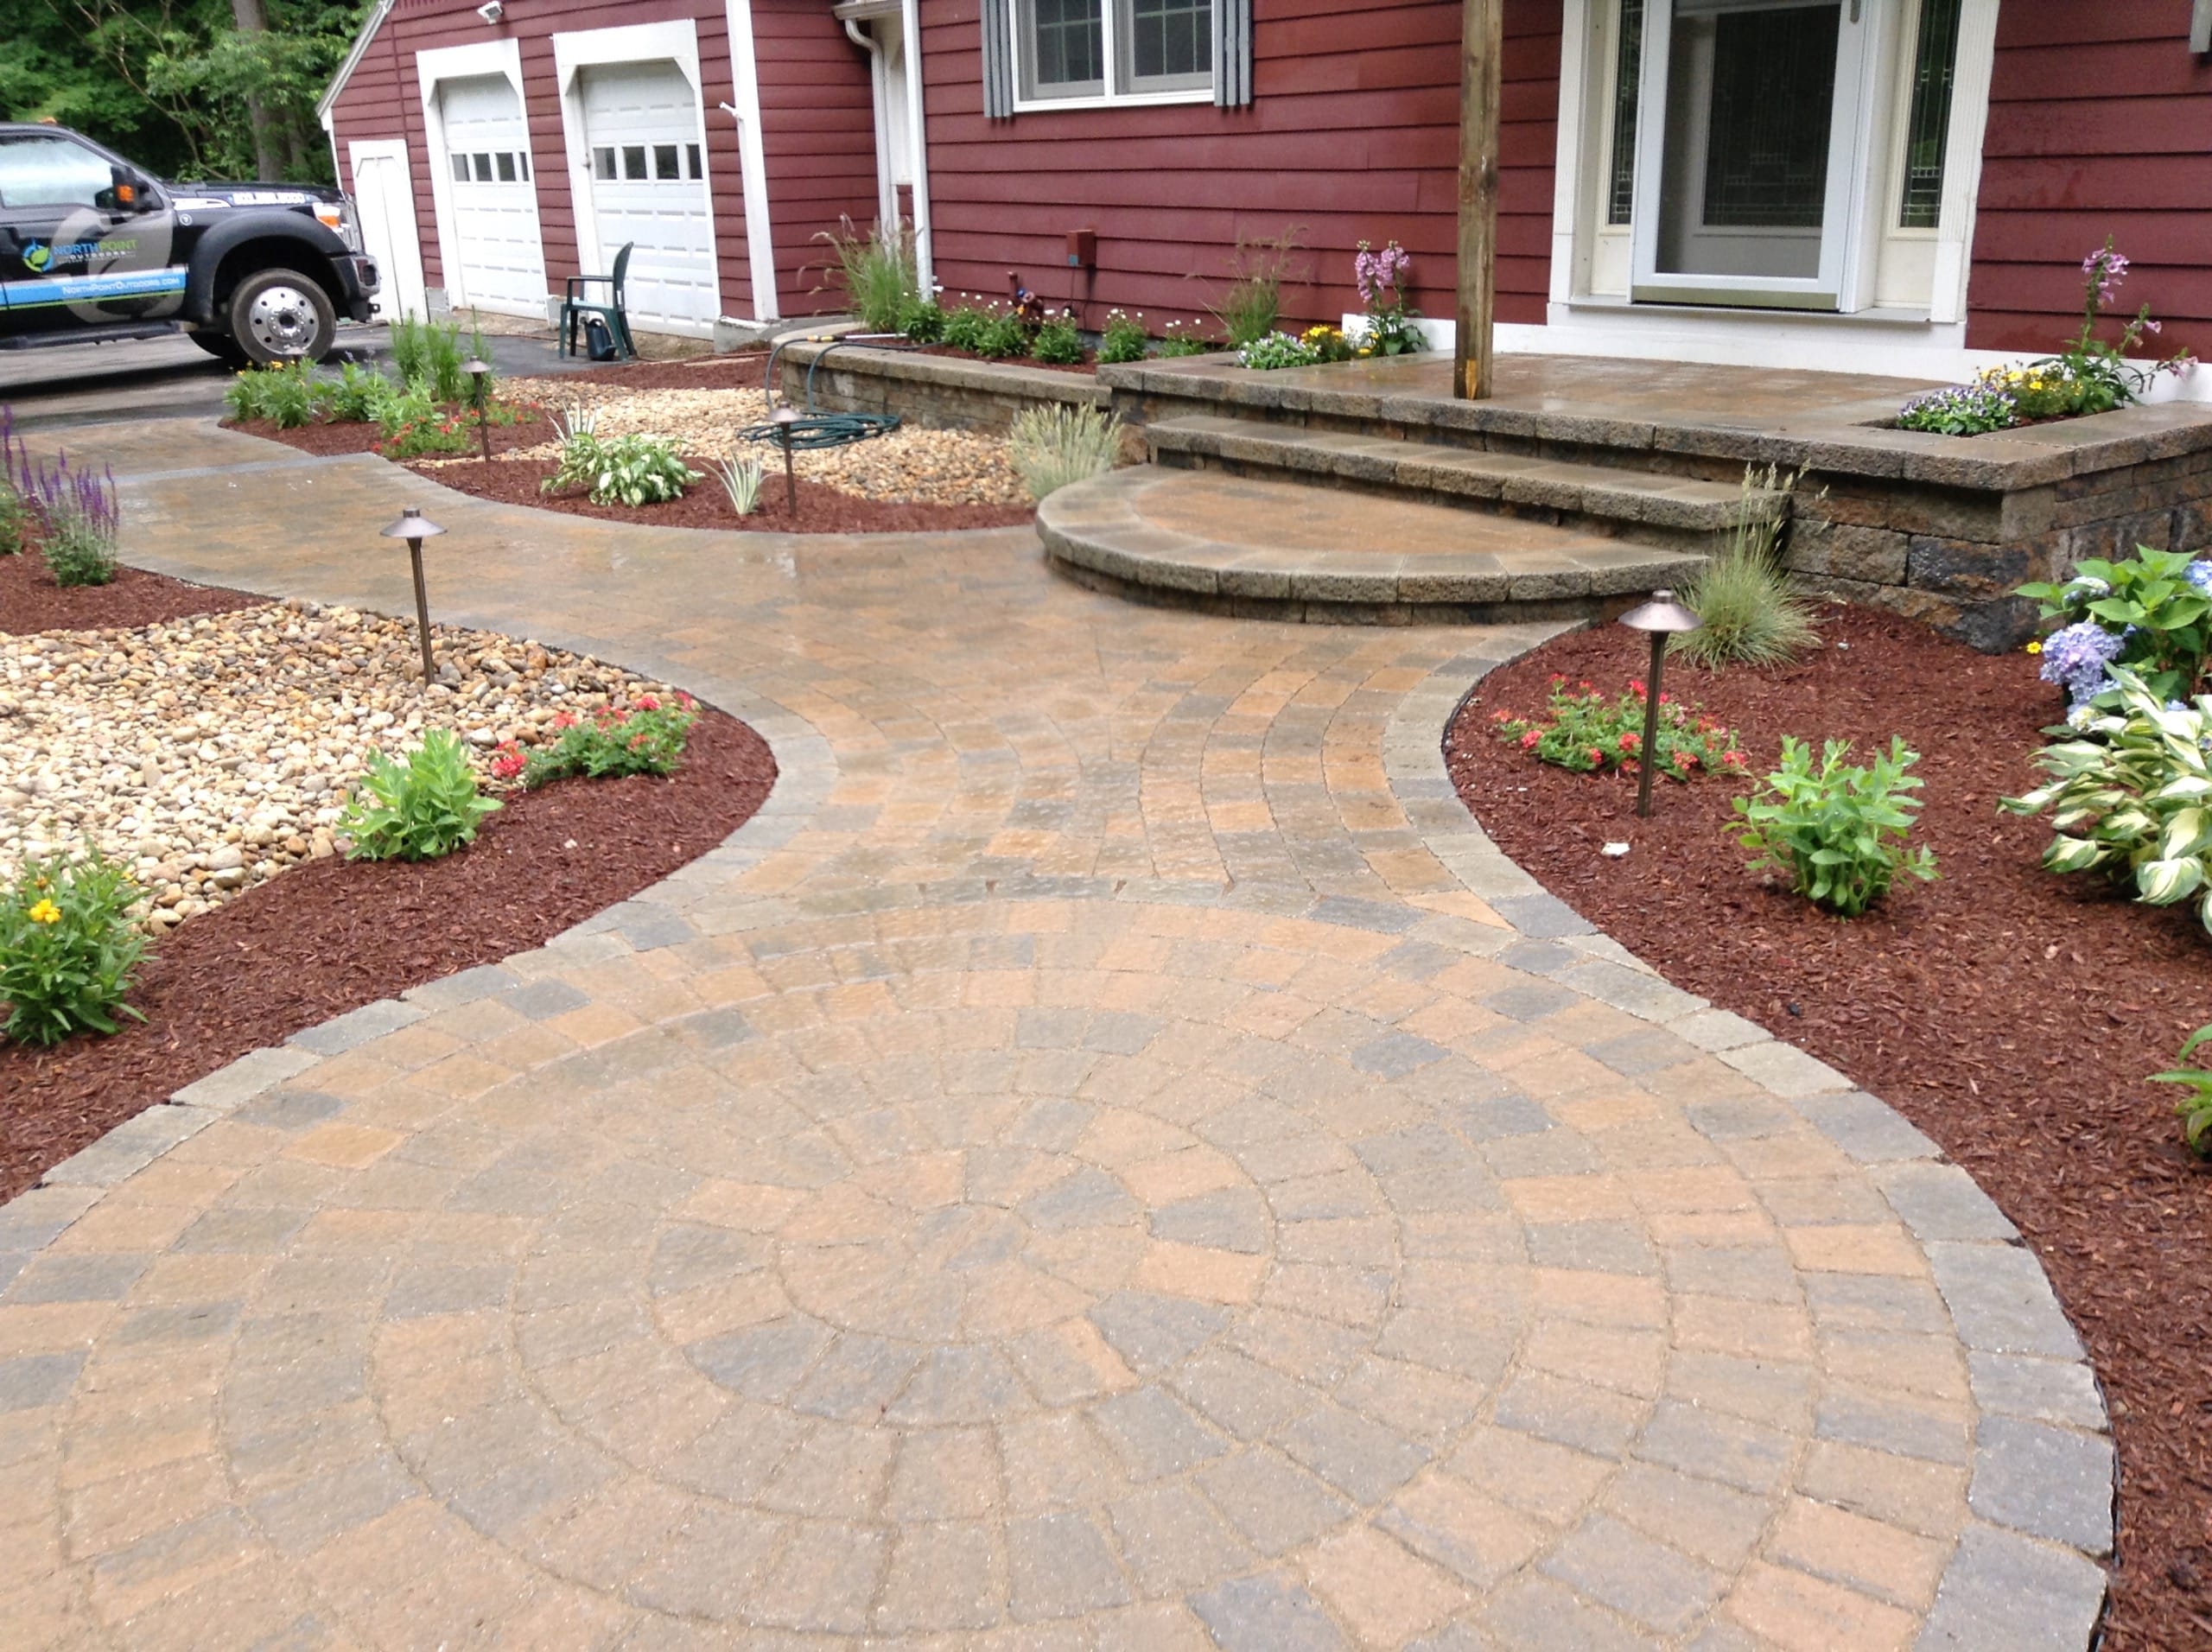 North Point Outdoors patio and walkways photos